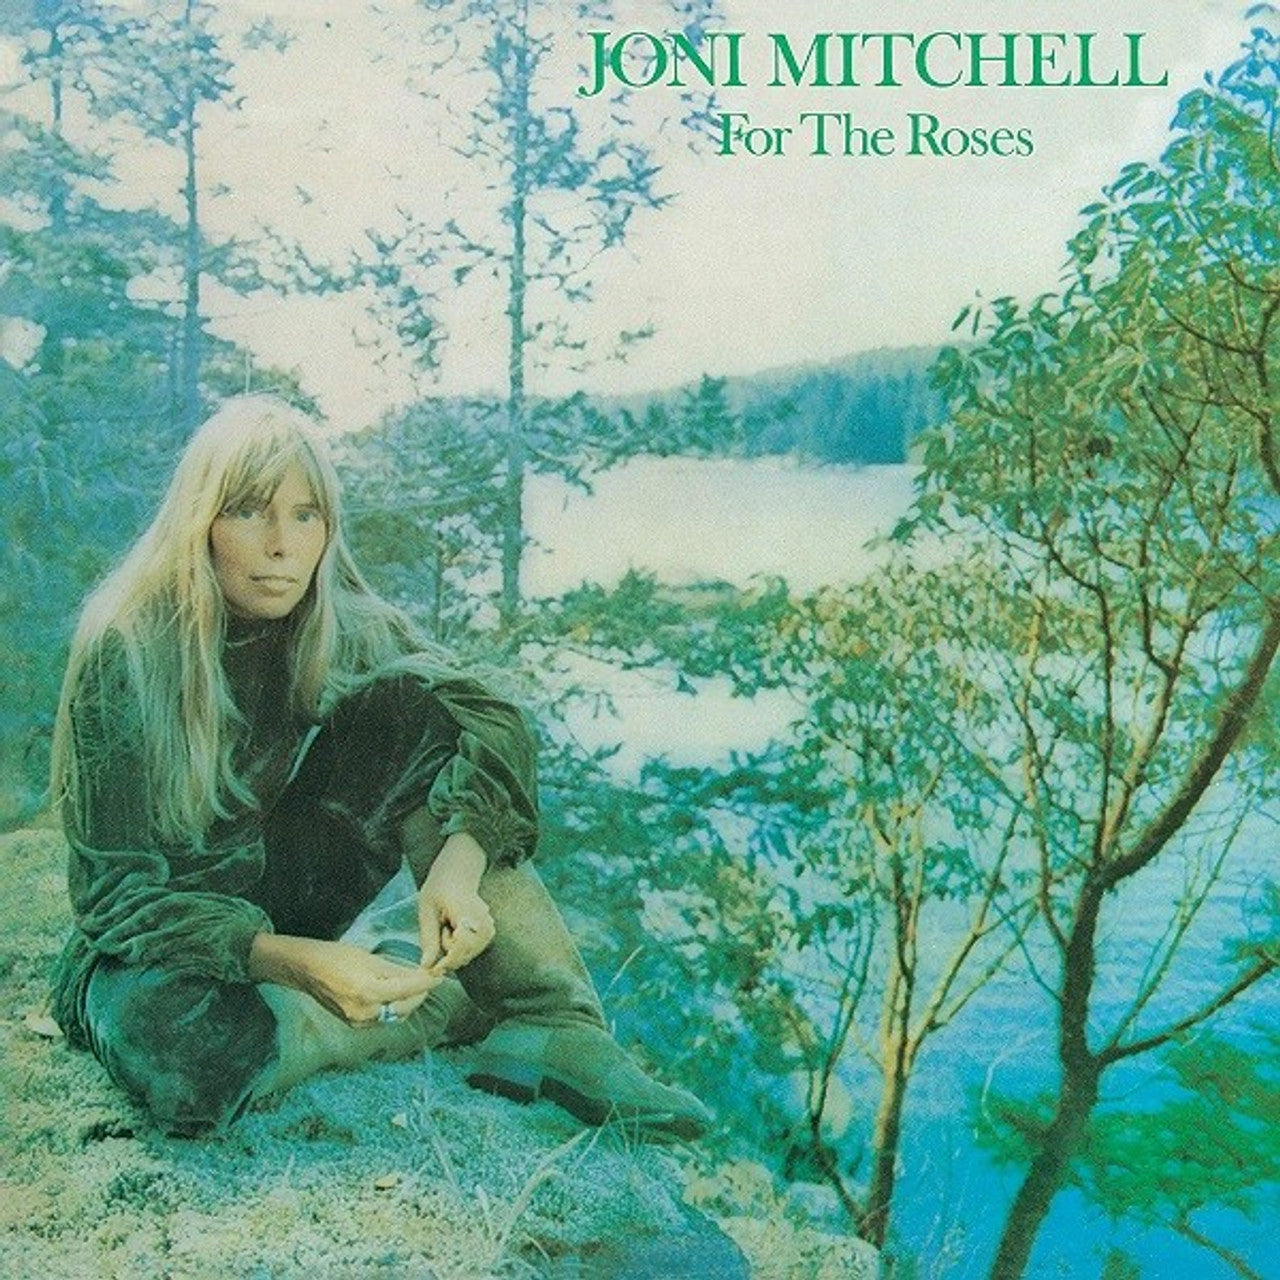 JONI MITCHELL - FOR THE ROSES (2022 REMASTER LP)